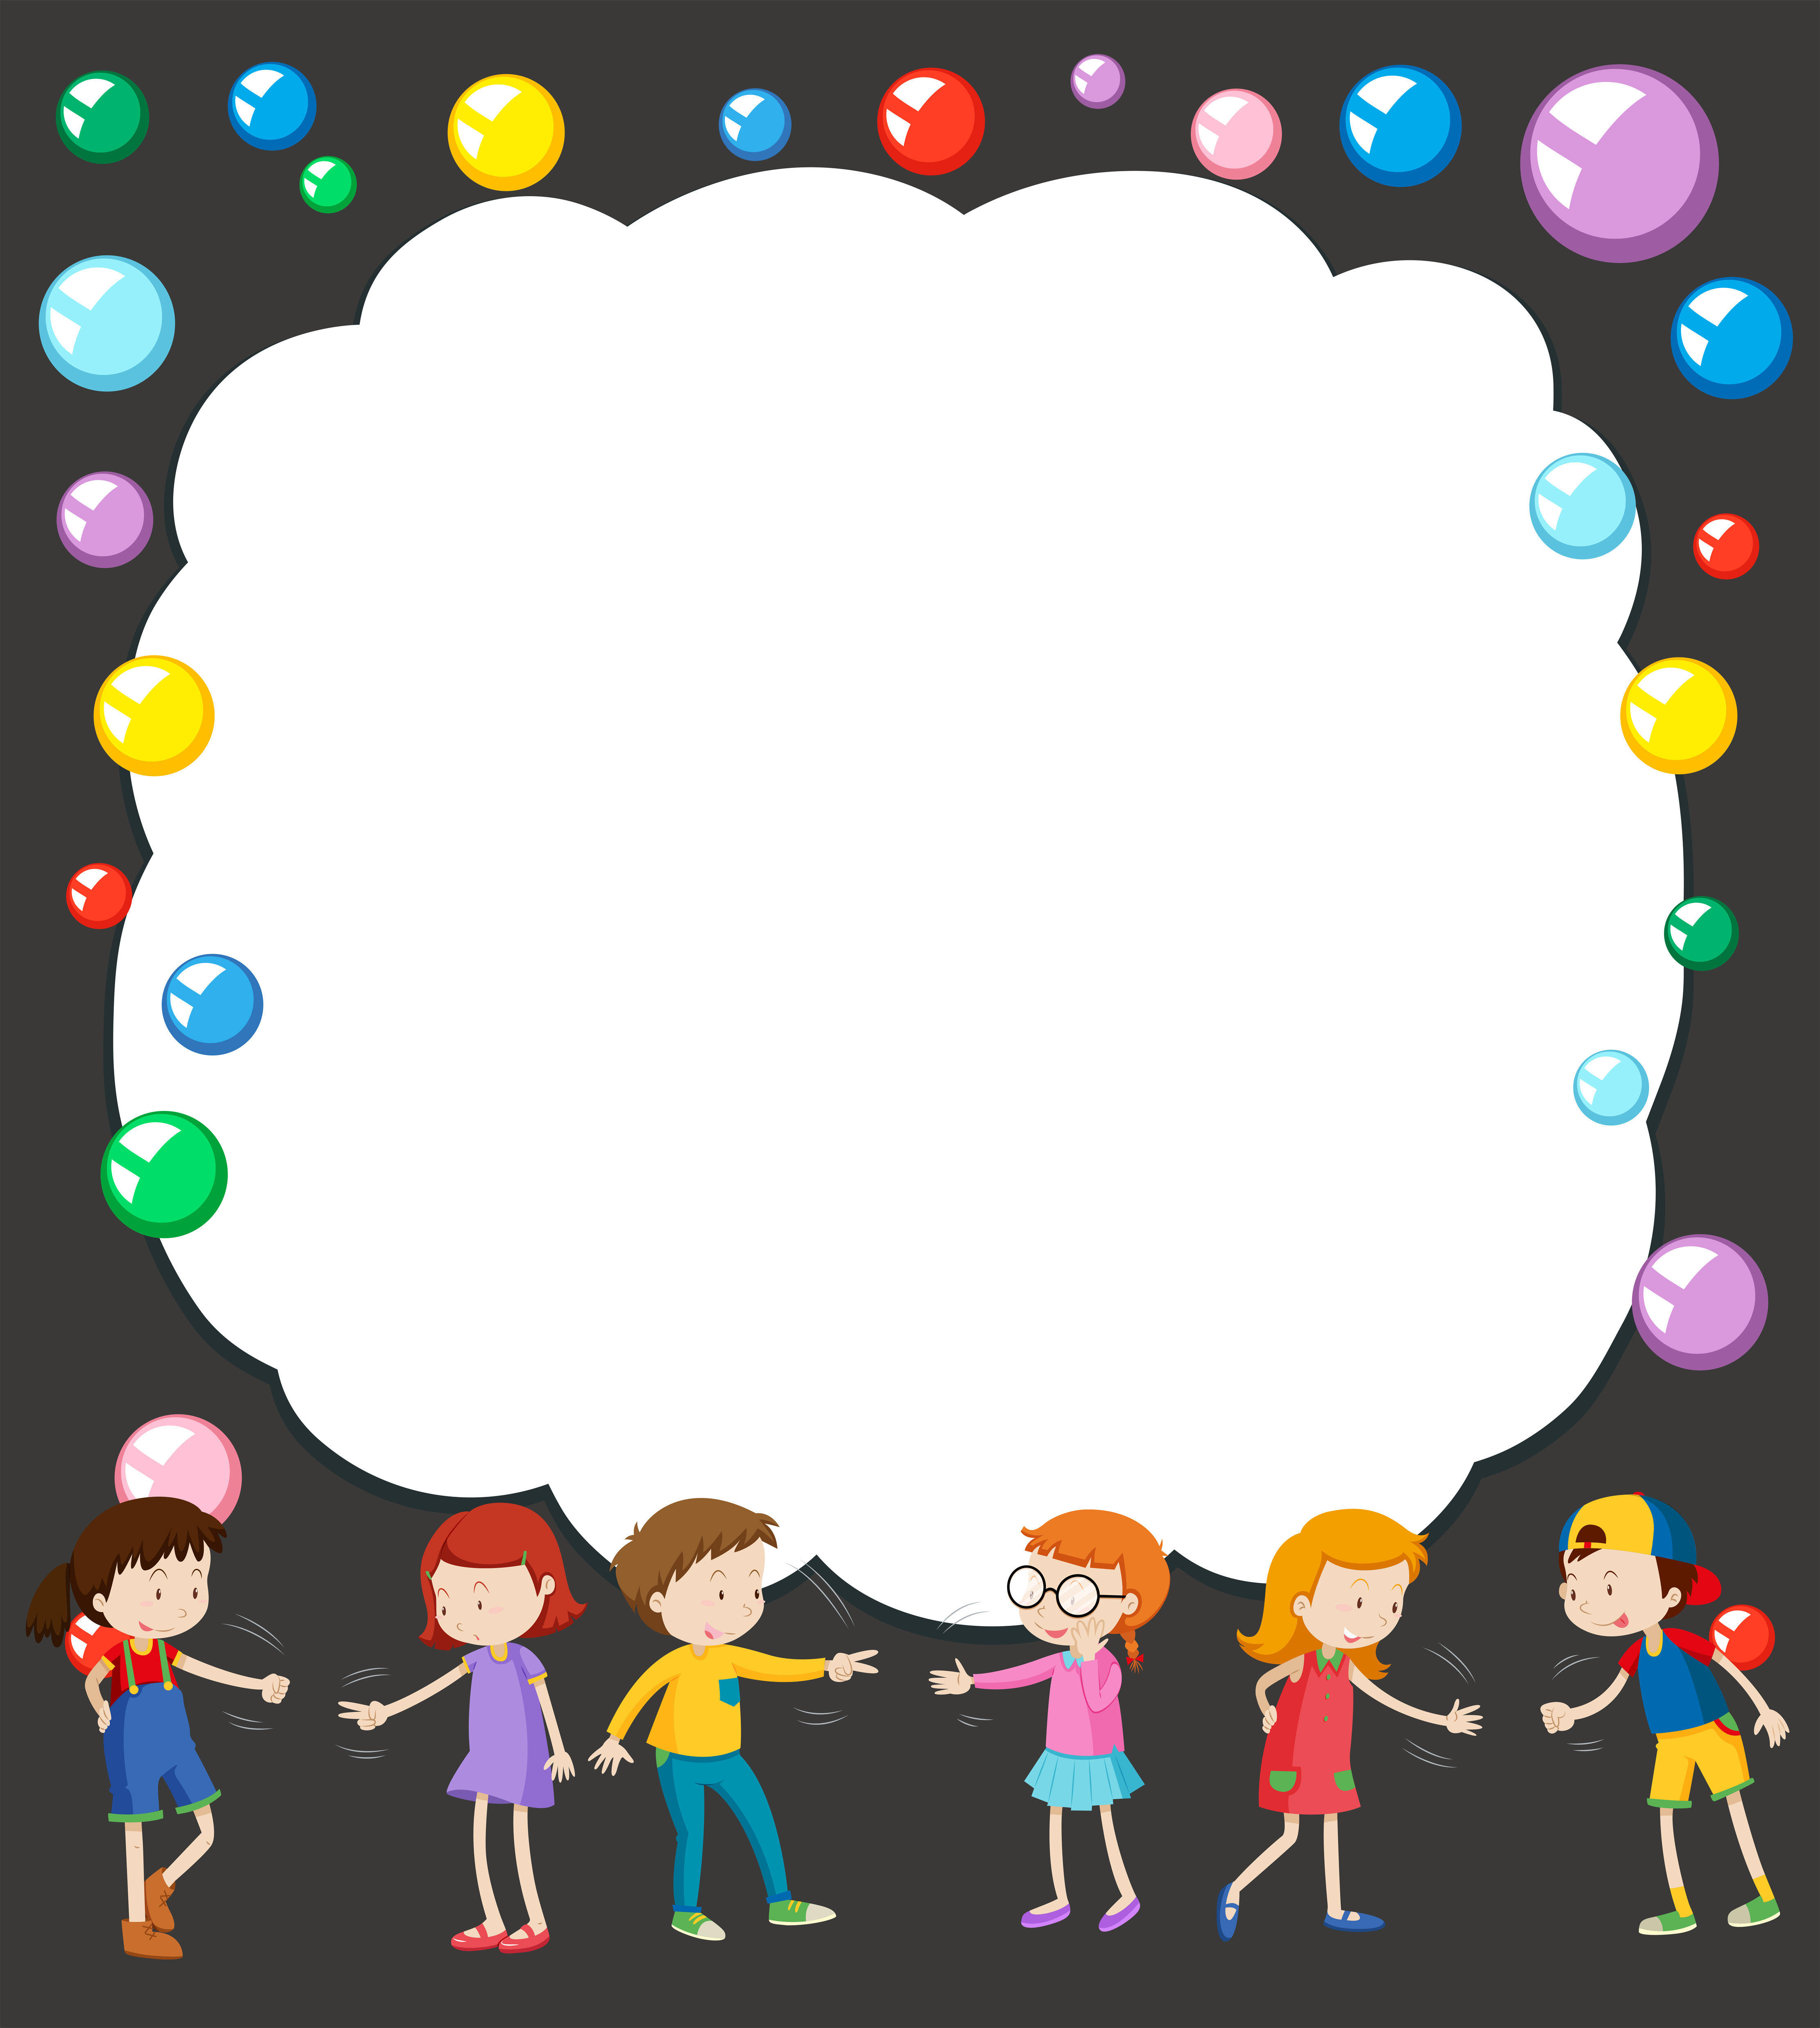 Download Border template with kids in background - Download Free ...